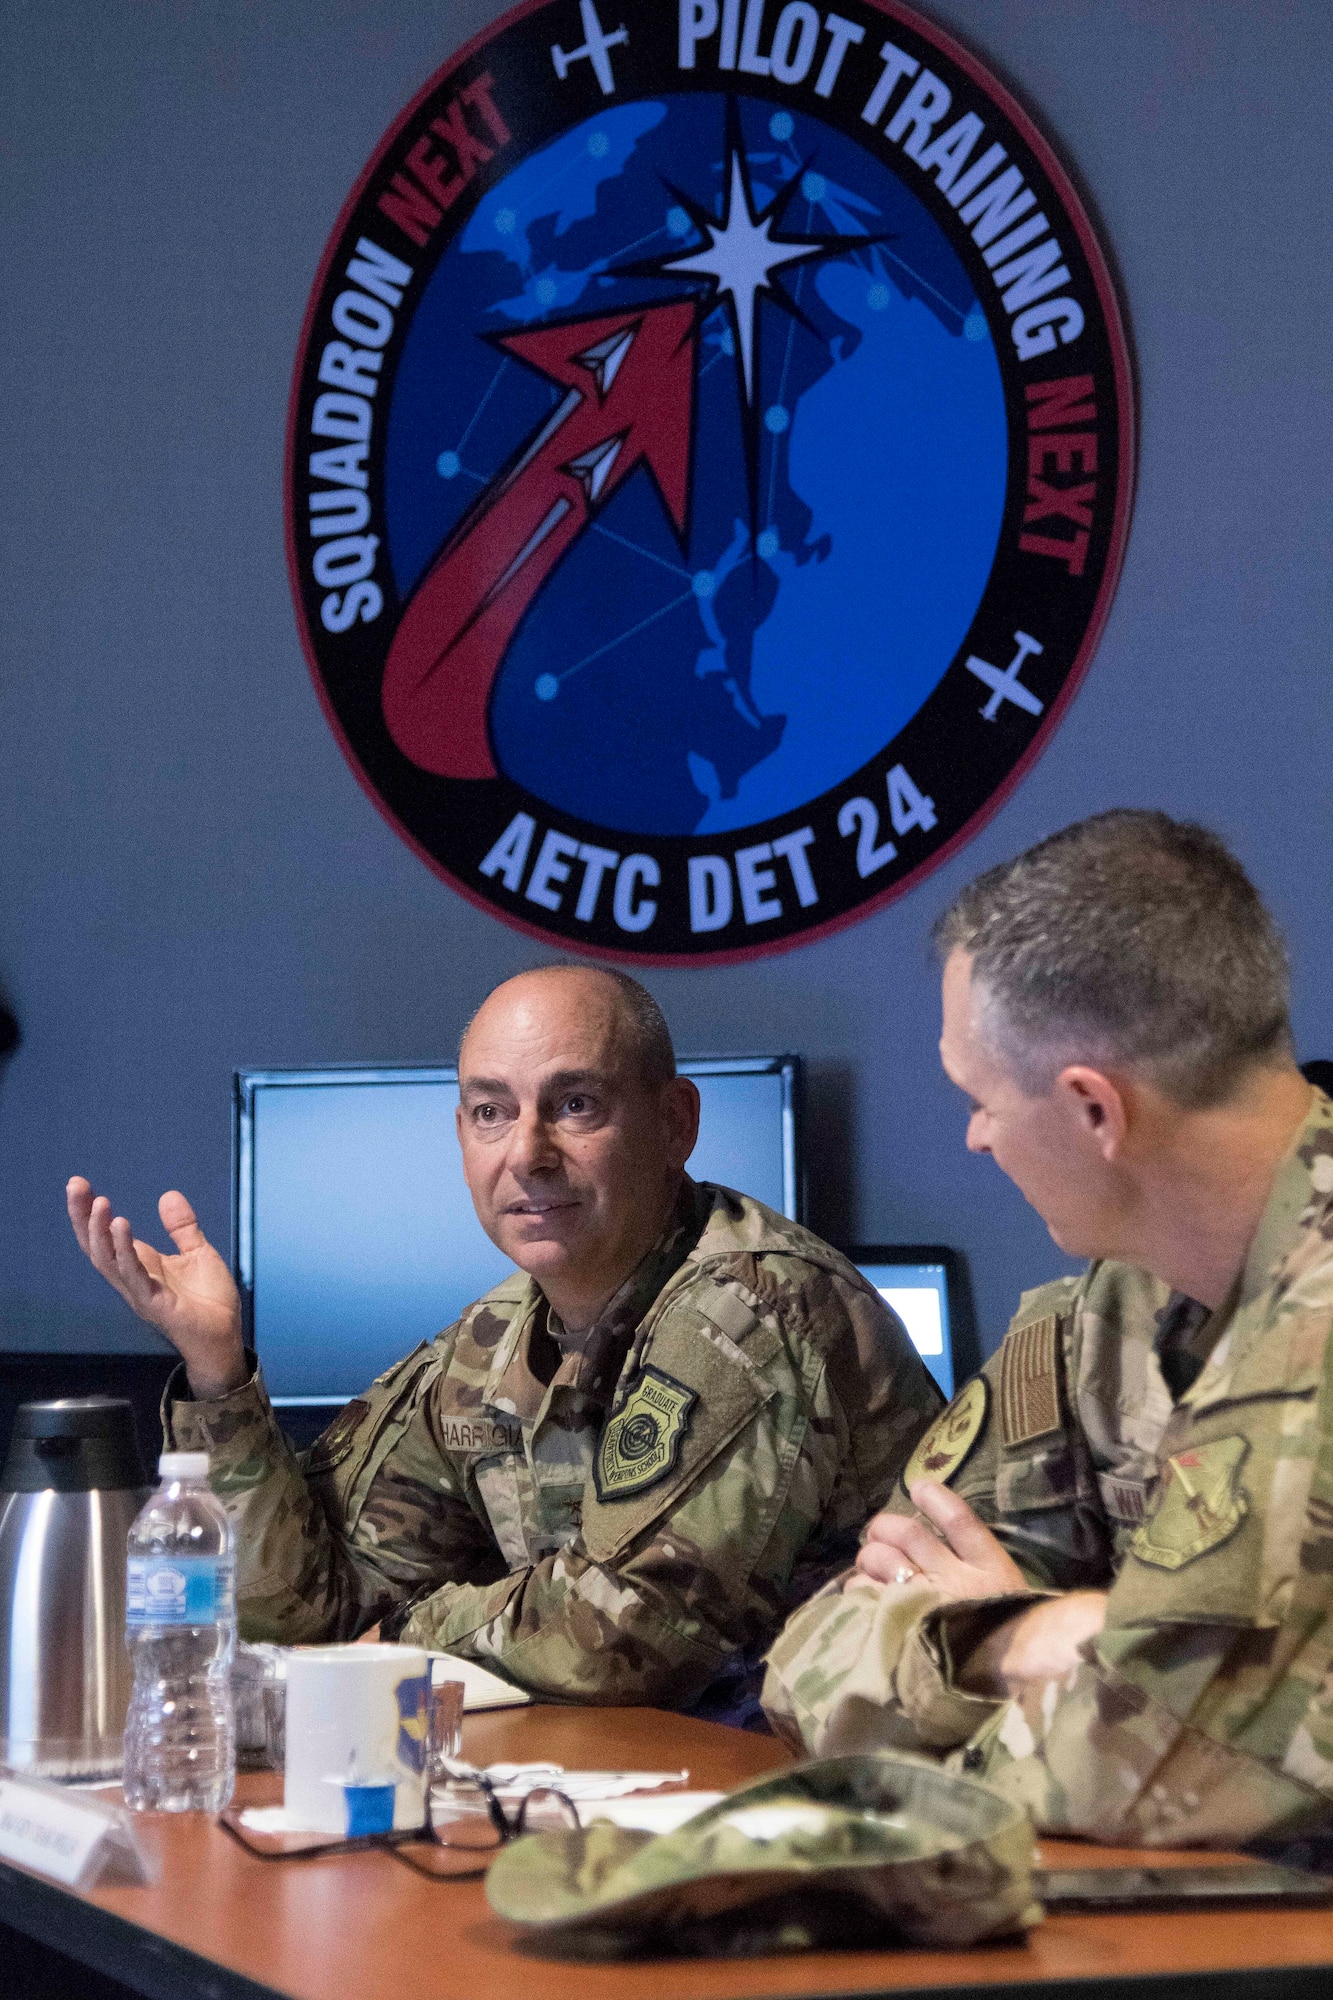 Gen. Jeffrey L. Harrigian, United States Air Forces Europe and United States Air Forces Africa commander, asks questions during a briefing on the training capabilities of Pilot Training Next during a visit to Detachment 24 at Joint Base San Antonio-Randolph, Texas, June 24, 2019. PTN is an Air Education and Training Command program to explore and prototype a pilot training environment that integrates various technologies to produce pilots in a learning-focused manner. (U.S. Air Force photo by Sean M. Worrell)